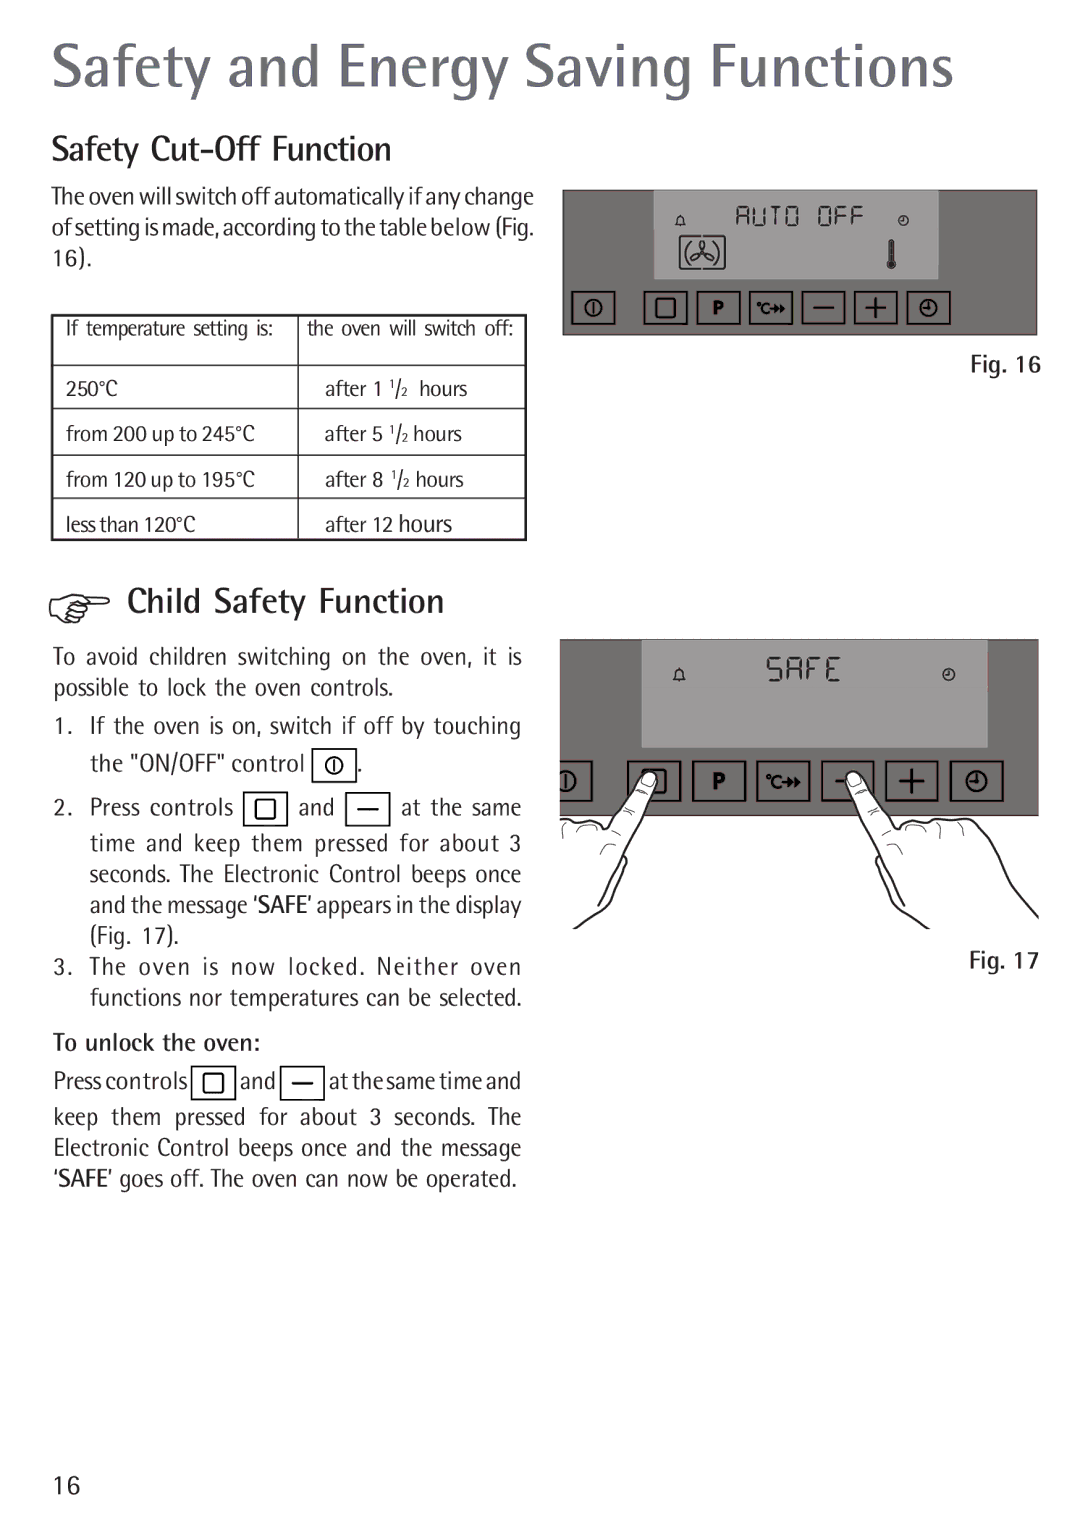 Electrolux B 89092-4 manual Safety Cut-Off Function, Child Safety Function, To unlock the oven 